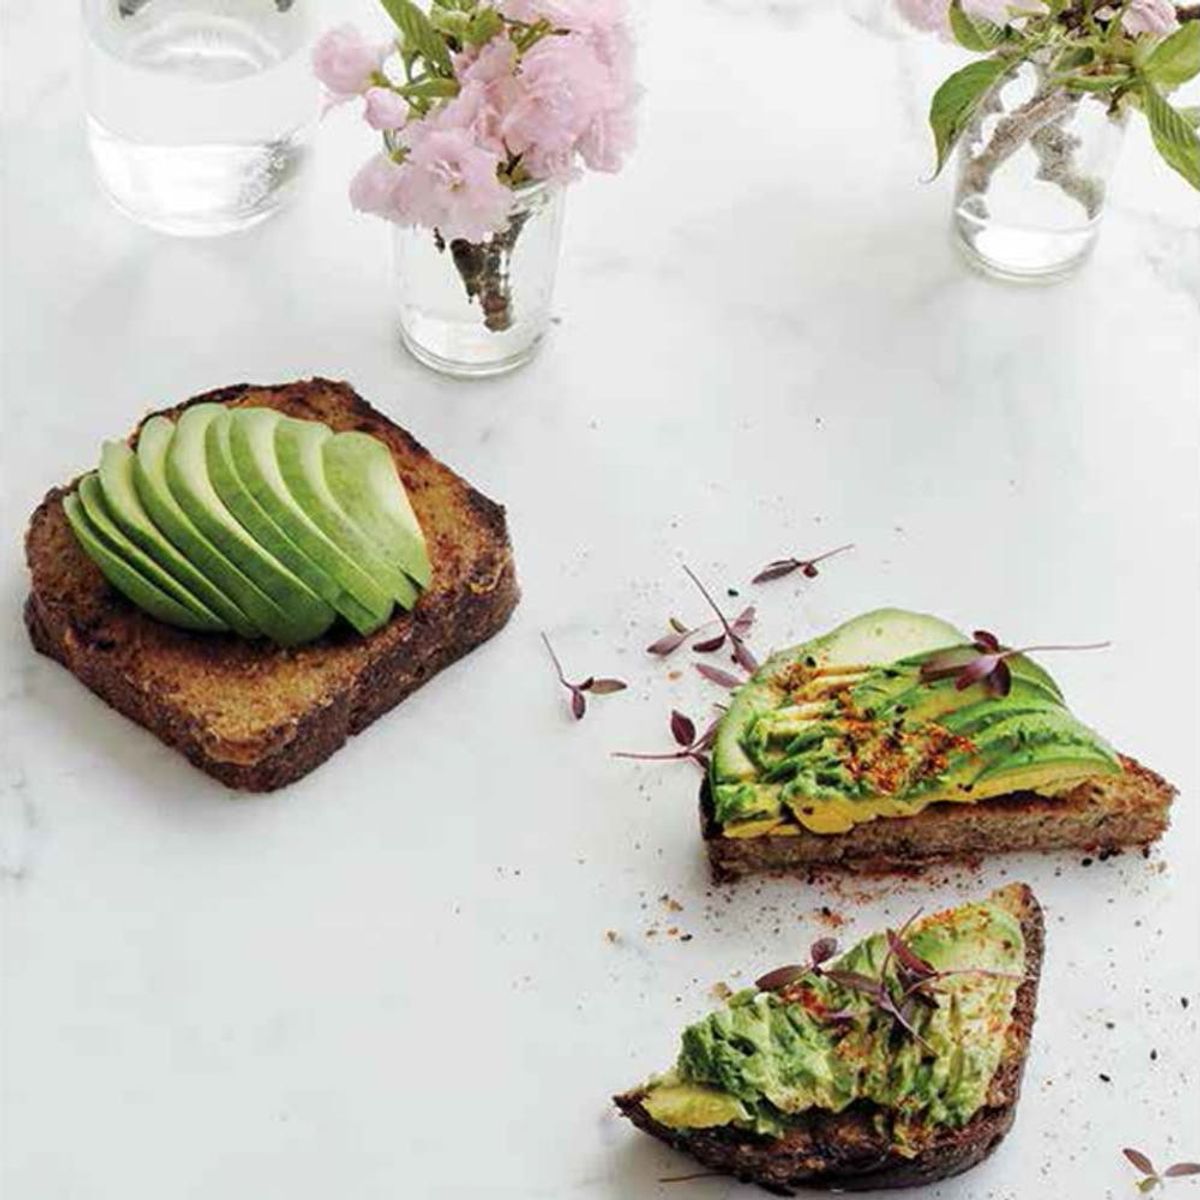 You’ve Never Seen Avocado Toast Like This Before